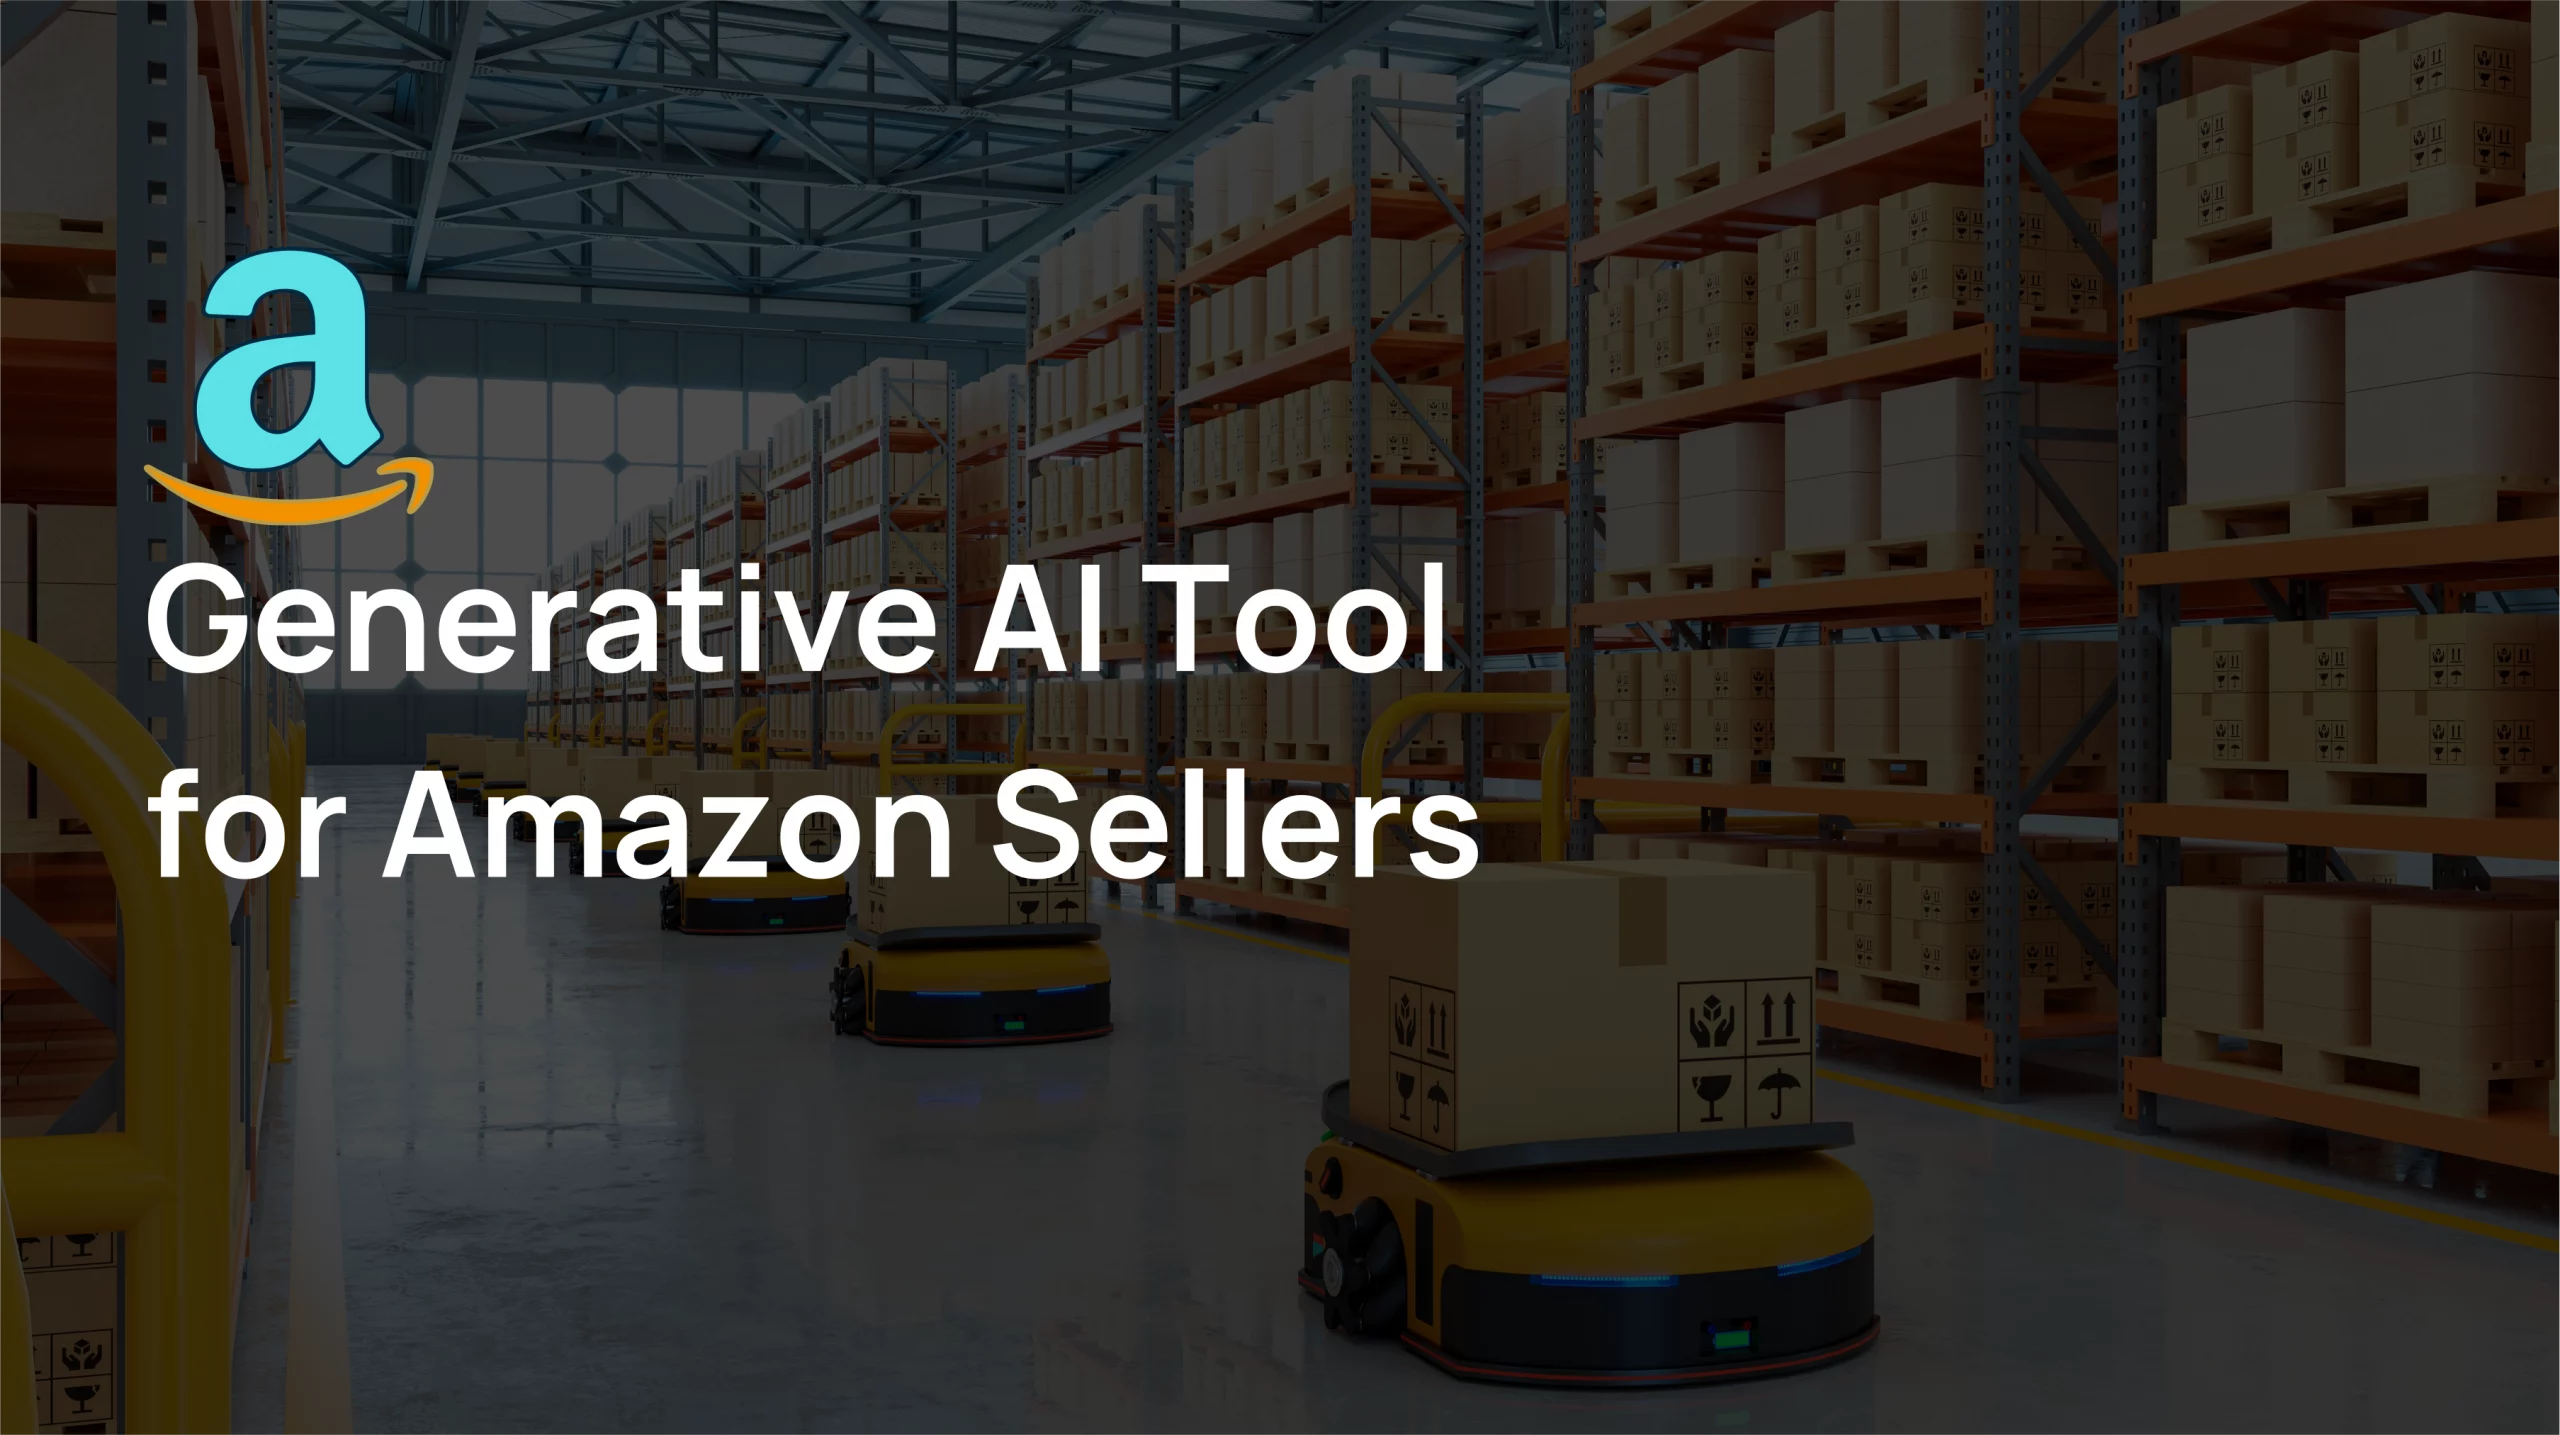 How Does Amazon AI for Sellers Work?